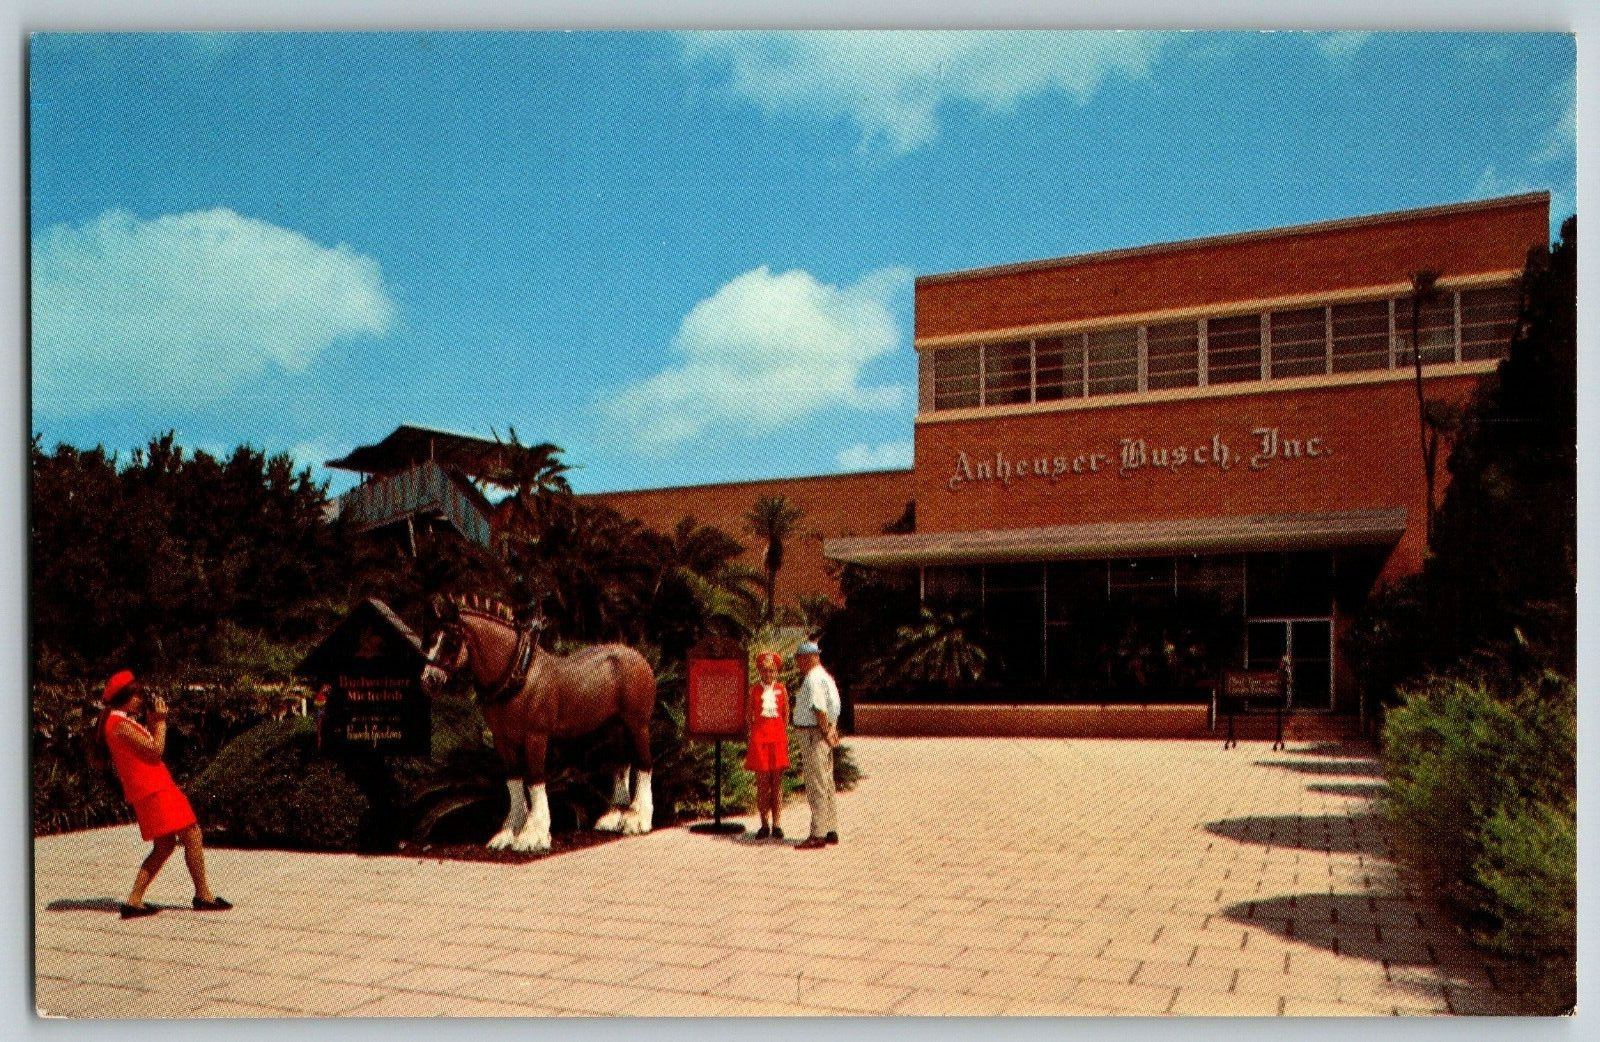 Tampa, Florida - Anheuser-Busch's Famous Brewery - Vintage Postcard - Unposted